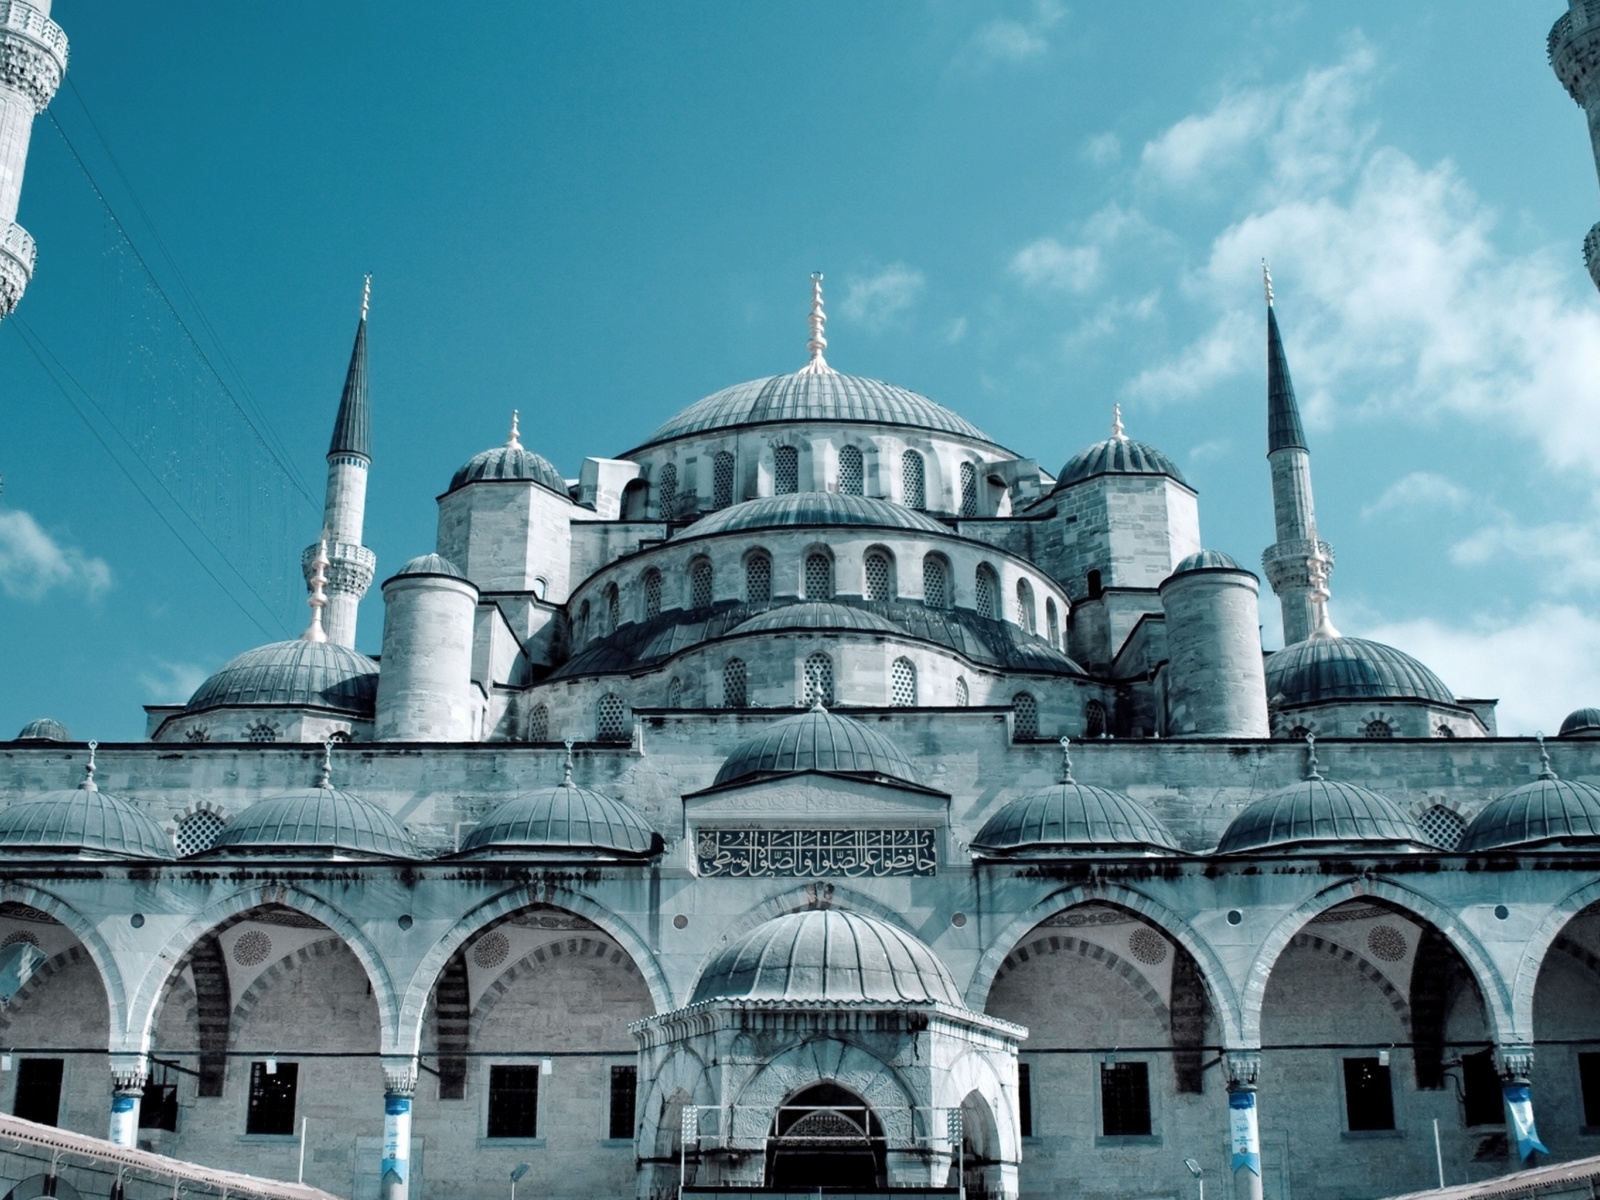 Sultan Ahmed Mosque in Istanbul screenshot #1 1600x1200